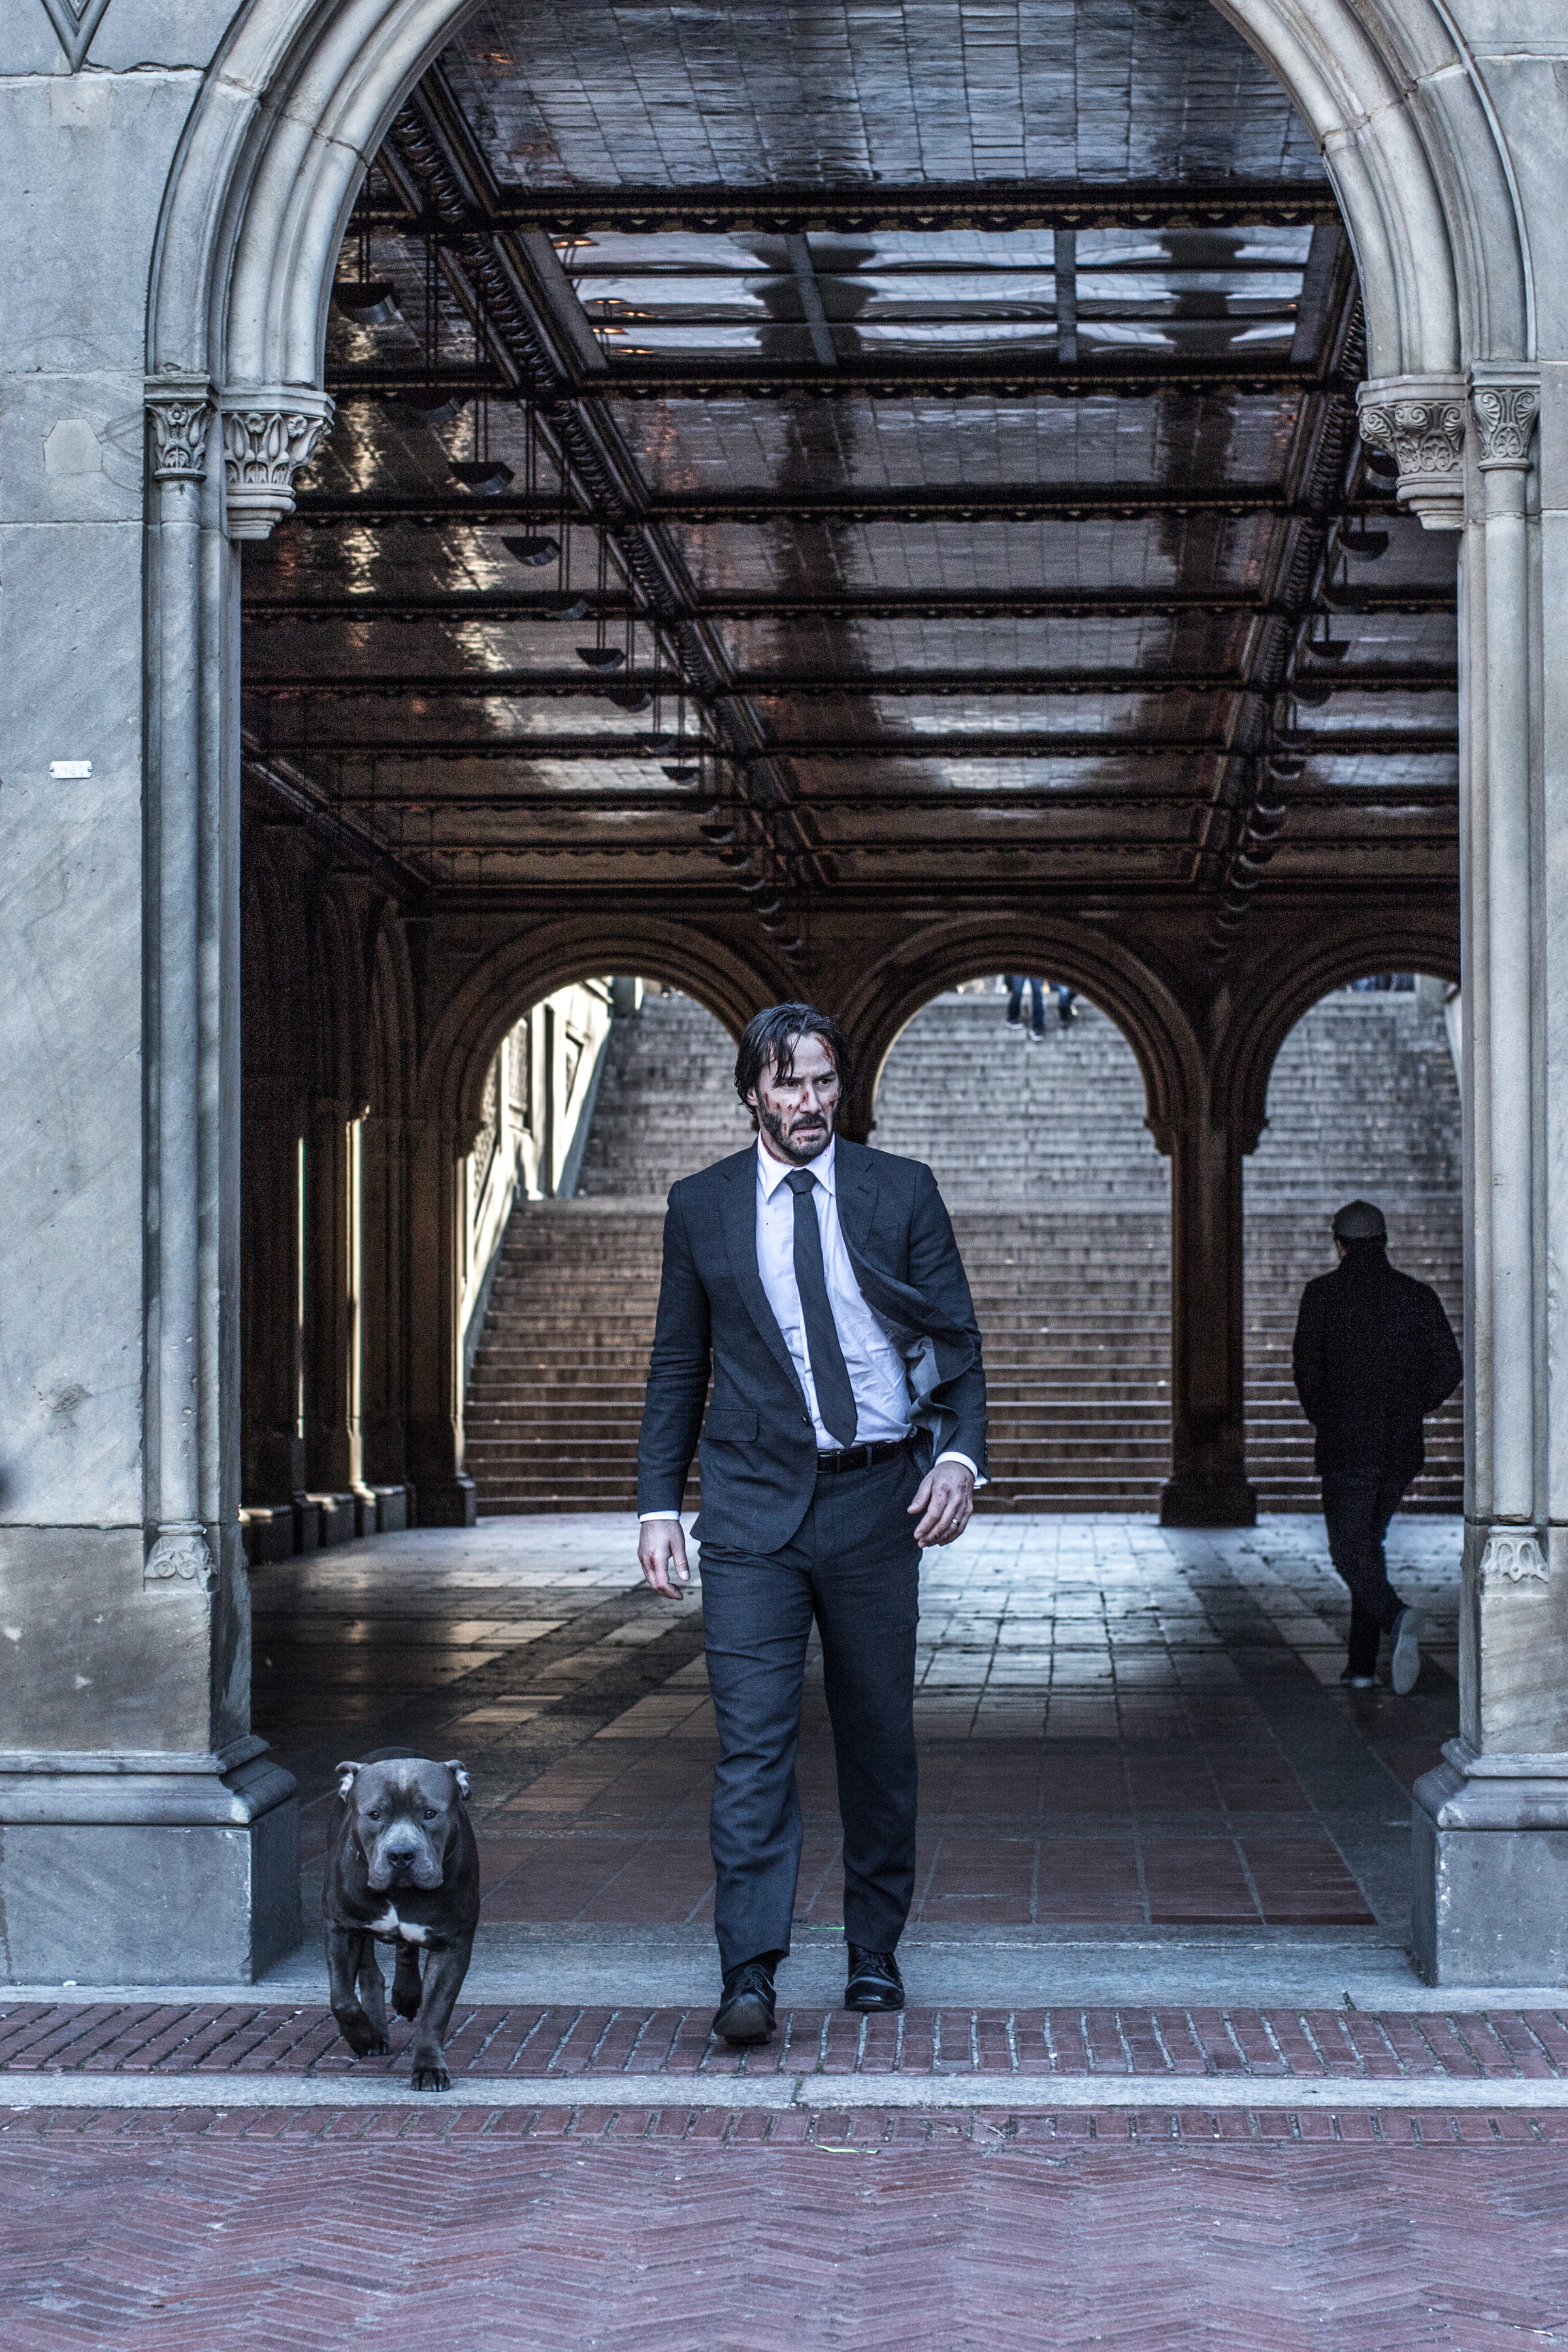  Keanu Reeves stars as &lsquo;John Wick&rsquo; in JOHN WICK: CHAPTER 2. Photo Credit: Niko Tavernise 